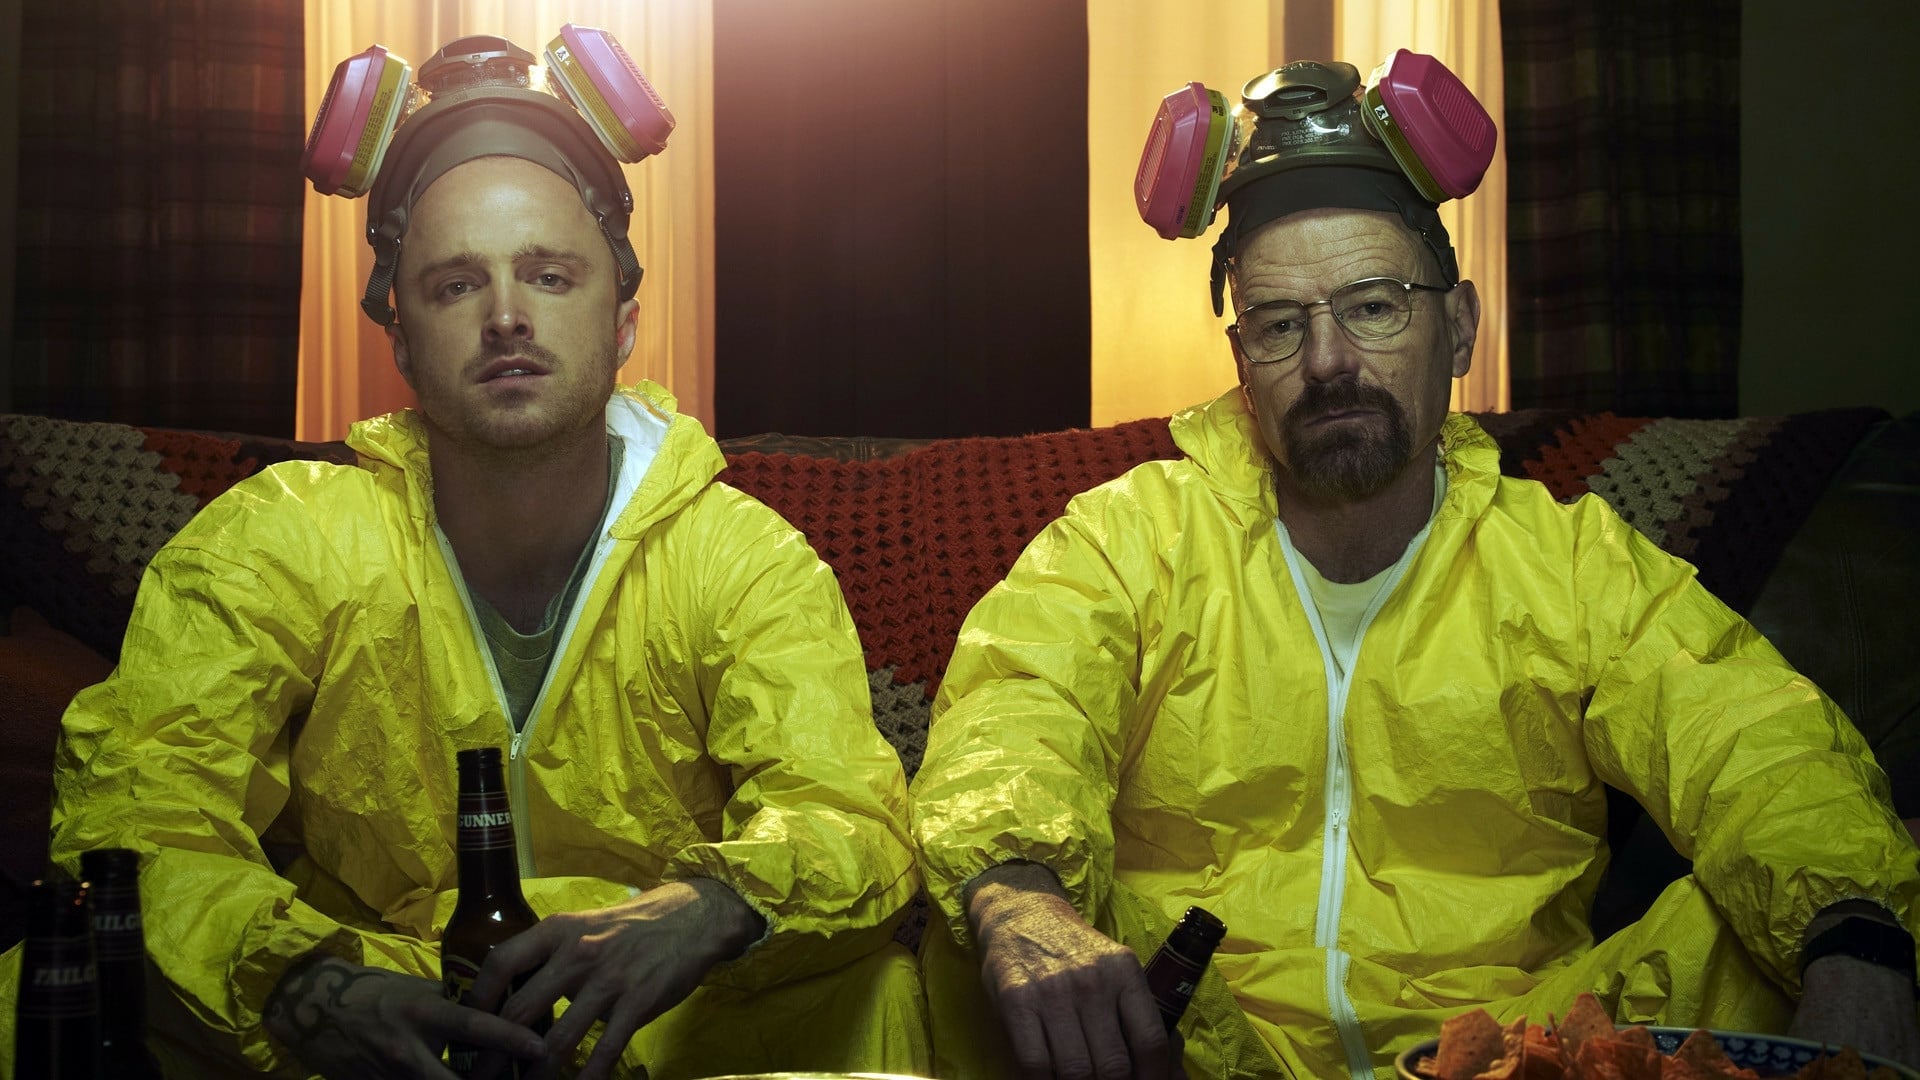 Aaron Paul och Bryan Cranston i Breaking Bad. Foto: Sony Pictures Television